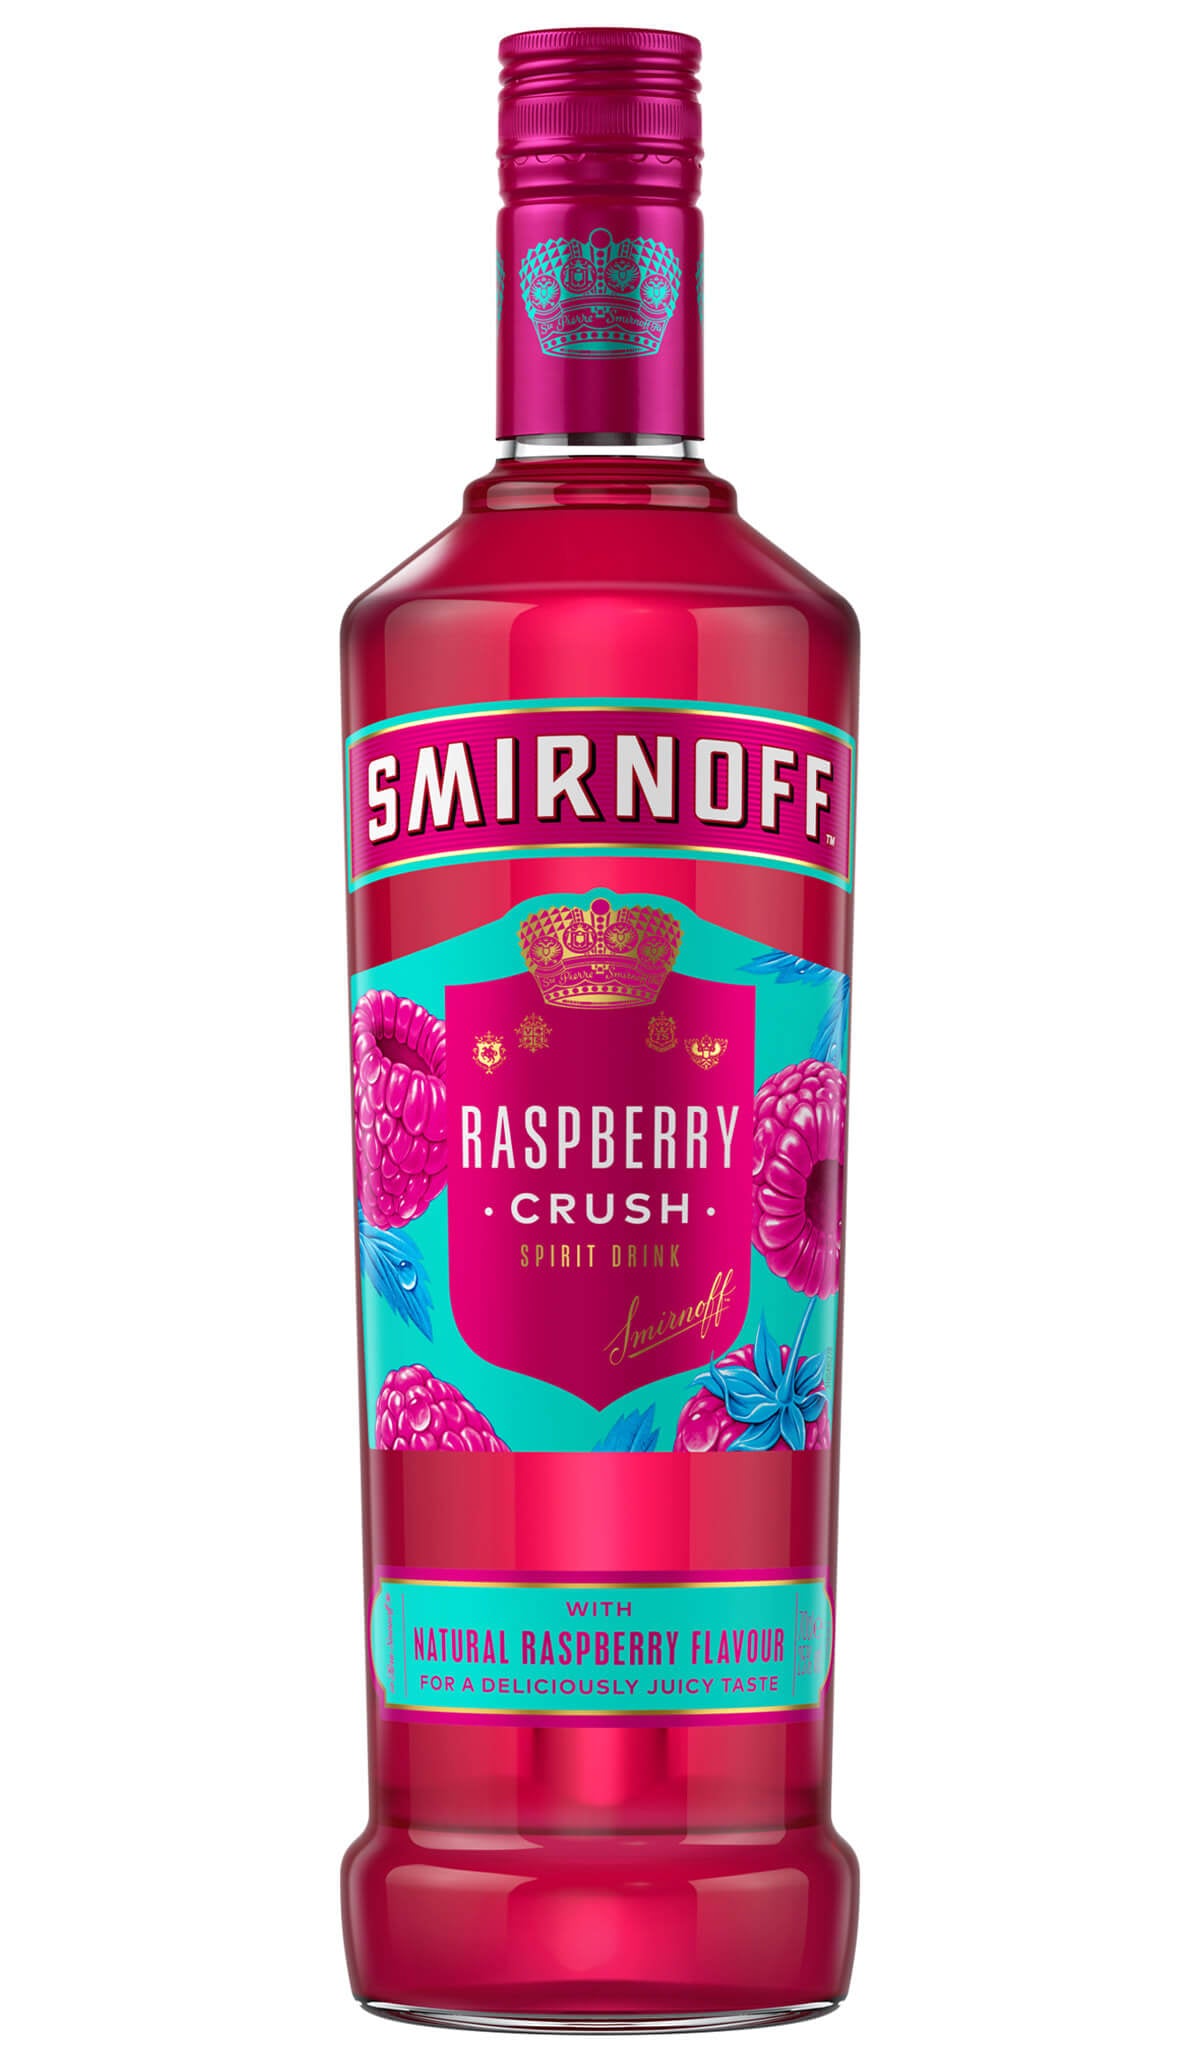 Find out more, explore the range and buy Smirnoff Raspberry Crush Vodka 700mL available online at Wine Sellers Direct - Australia's independent liquor specialists.